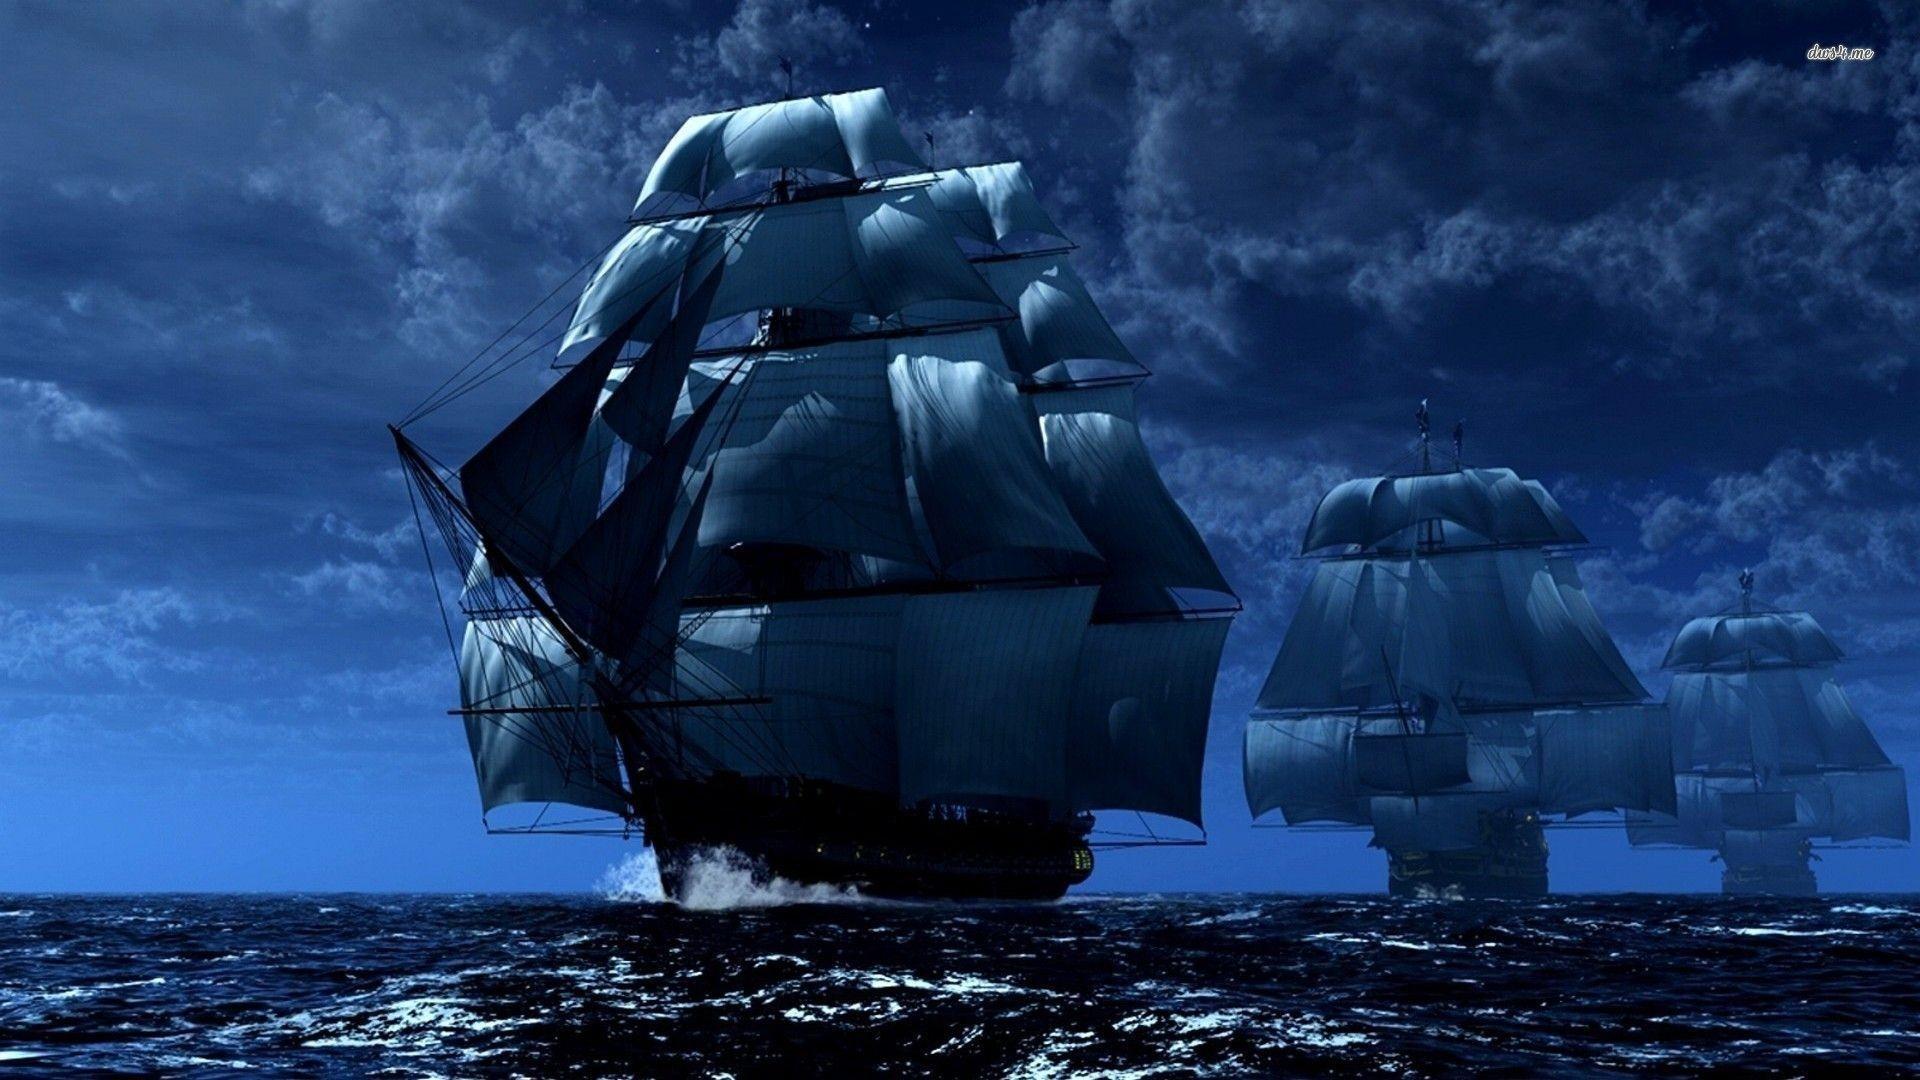 Pirate Ship Wallpaper background picture